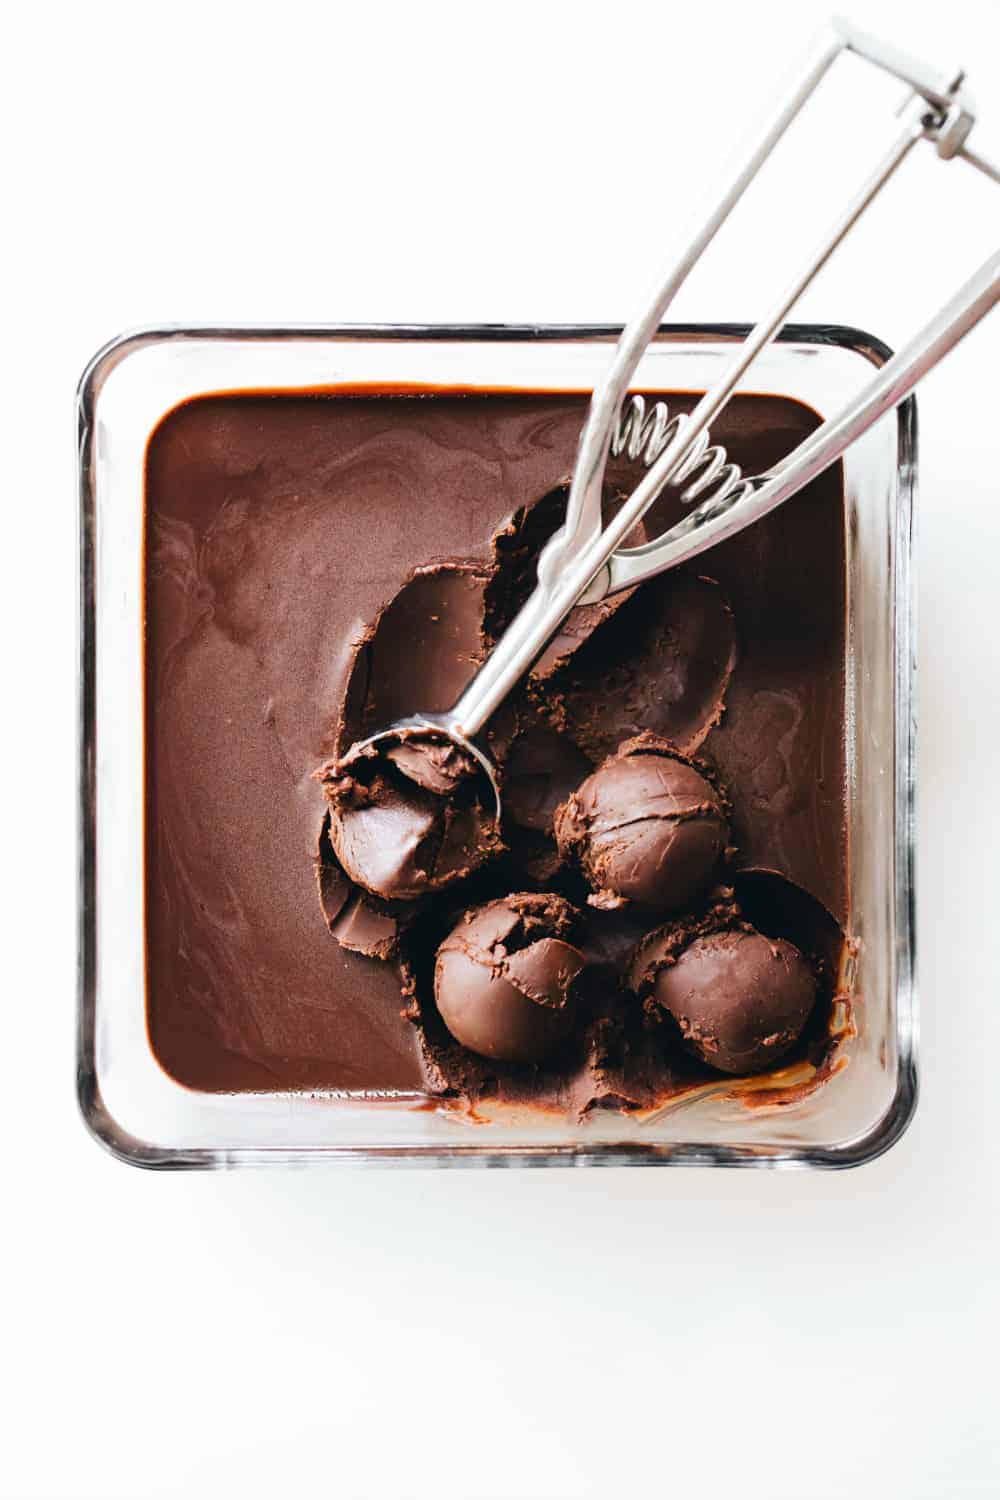 Making candy at home doesn't have to be hard. Simple Homemade Truffles are easy to make and customize!